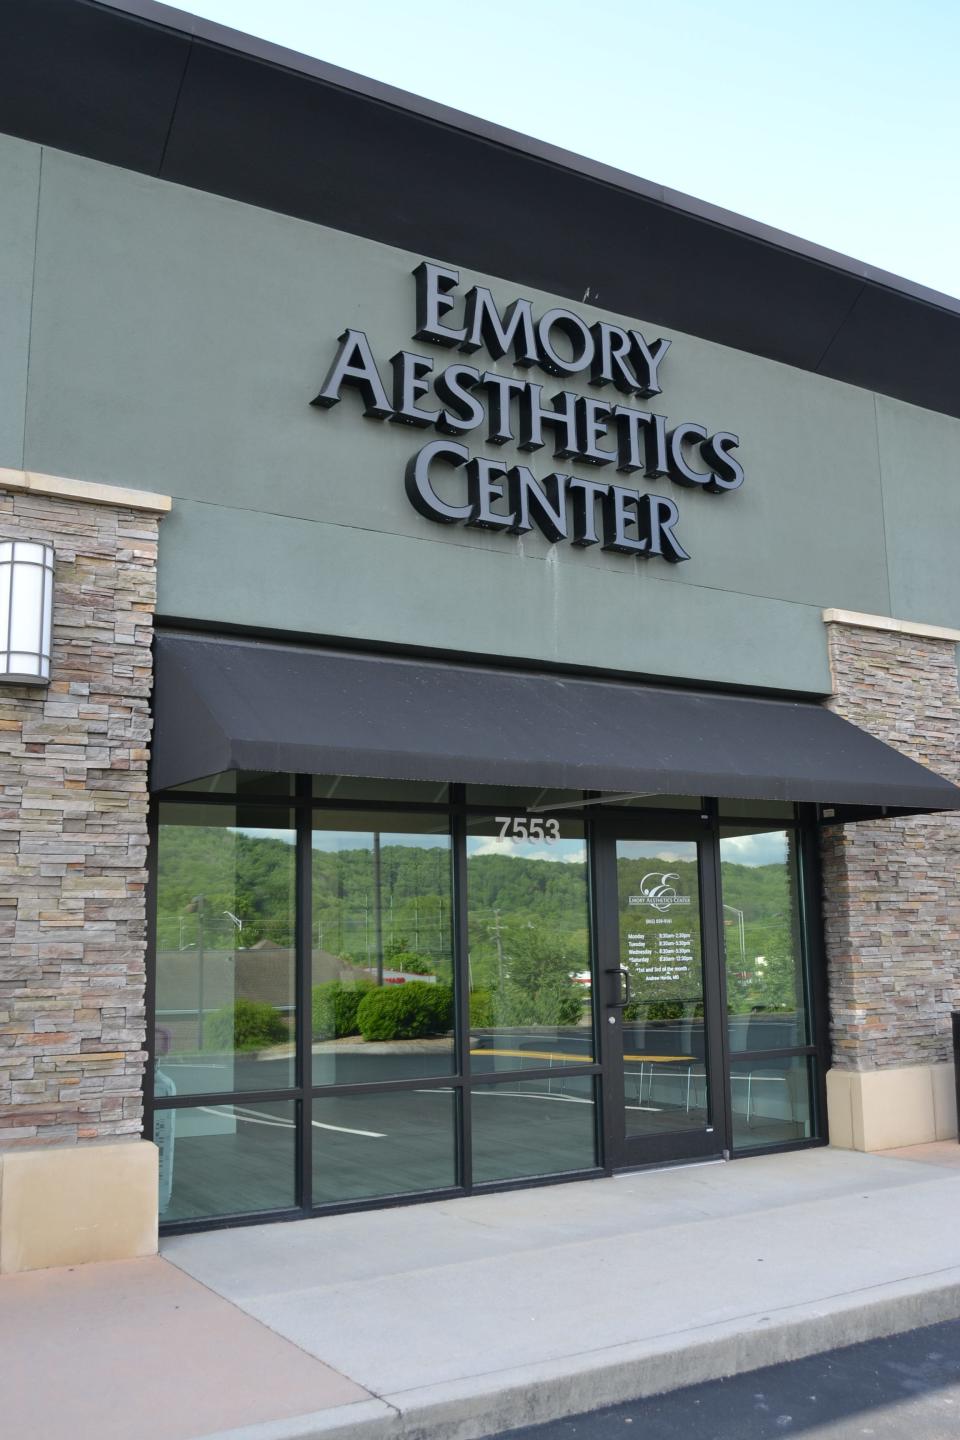 After careful examination, it was concluded that there was a need for an aesthetics center in Powell.